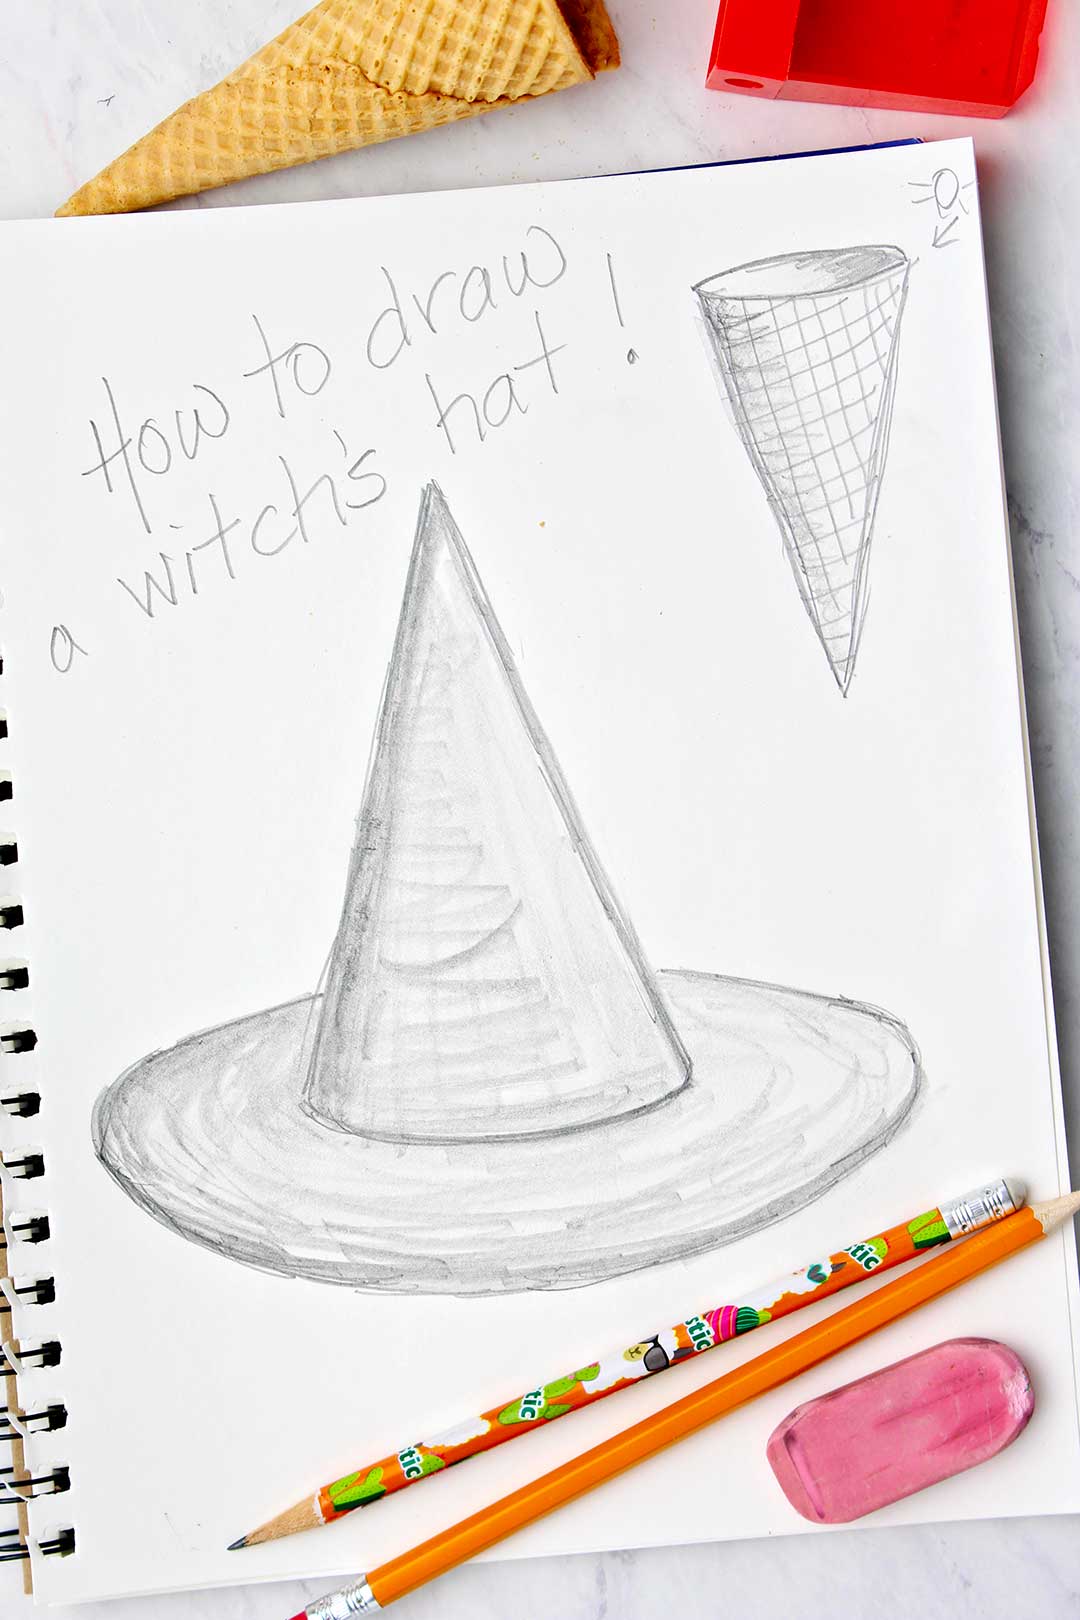 Final pencil drawing of a witches hat in a sketchbook. Two pencils, an eraser and an ice cream cone are also in the photo.